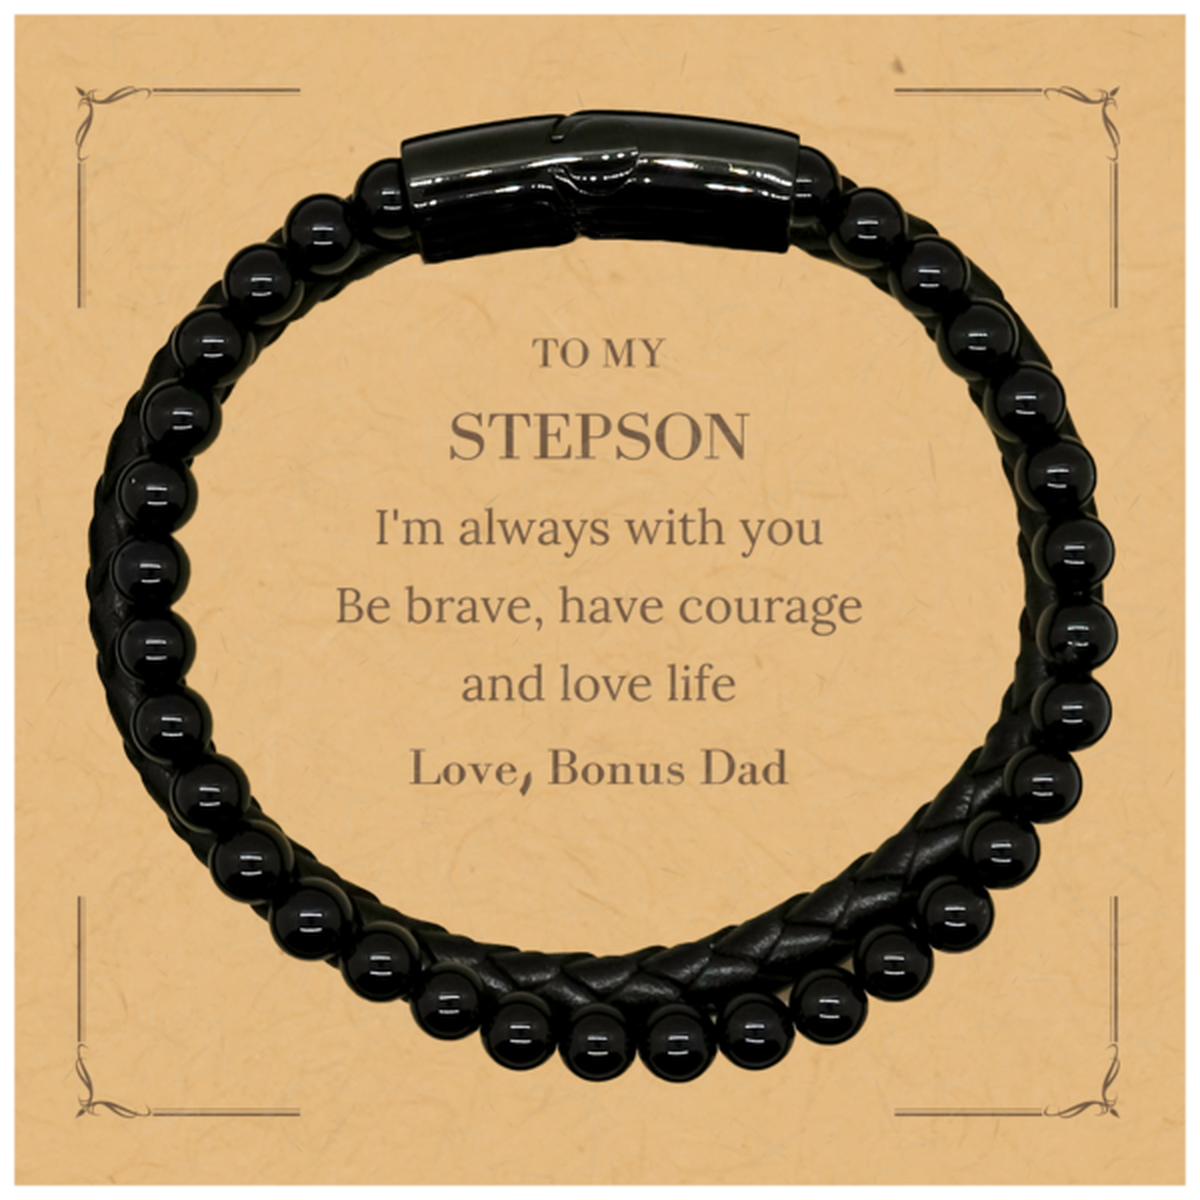 To My Stepson Gifts from Bonus Dad, Unique Stone Leather Bracelets Inspirational Christmas Birthday Graduation Gifts for Stepson I'm always with you. Be brave, have courage and love life. Love, Bonus Dad